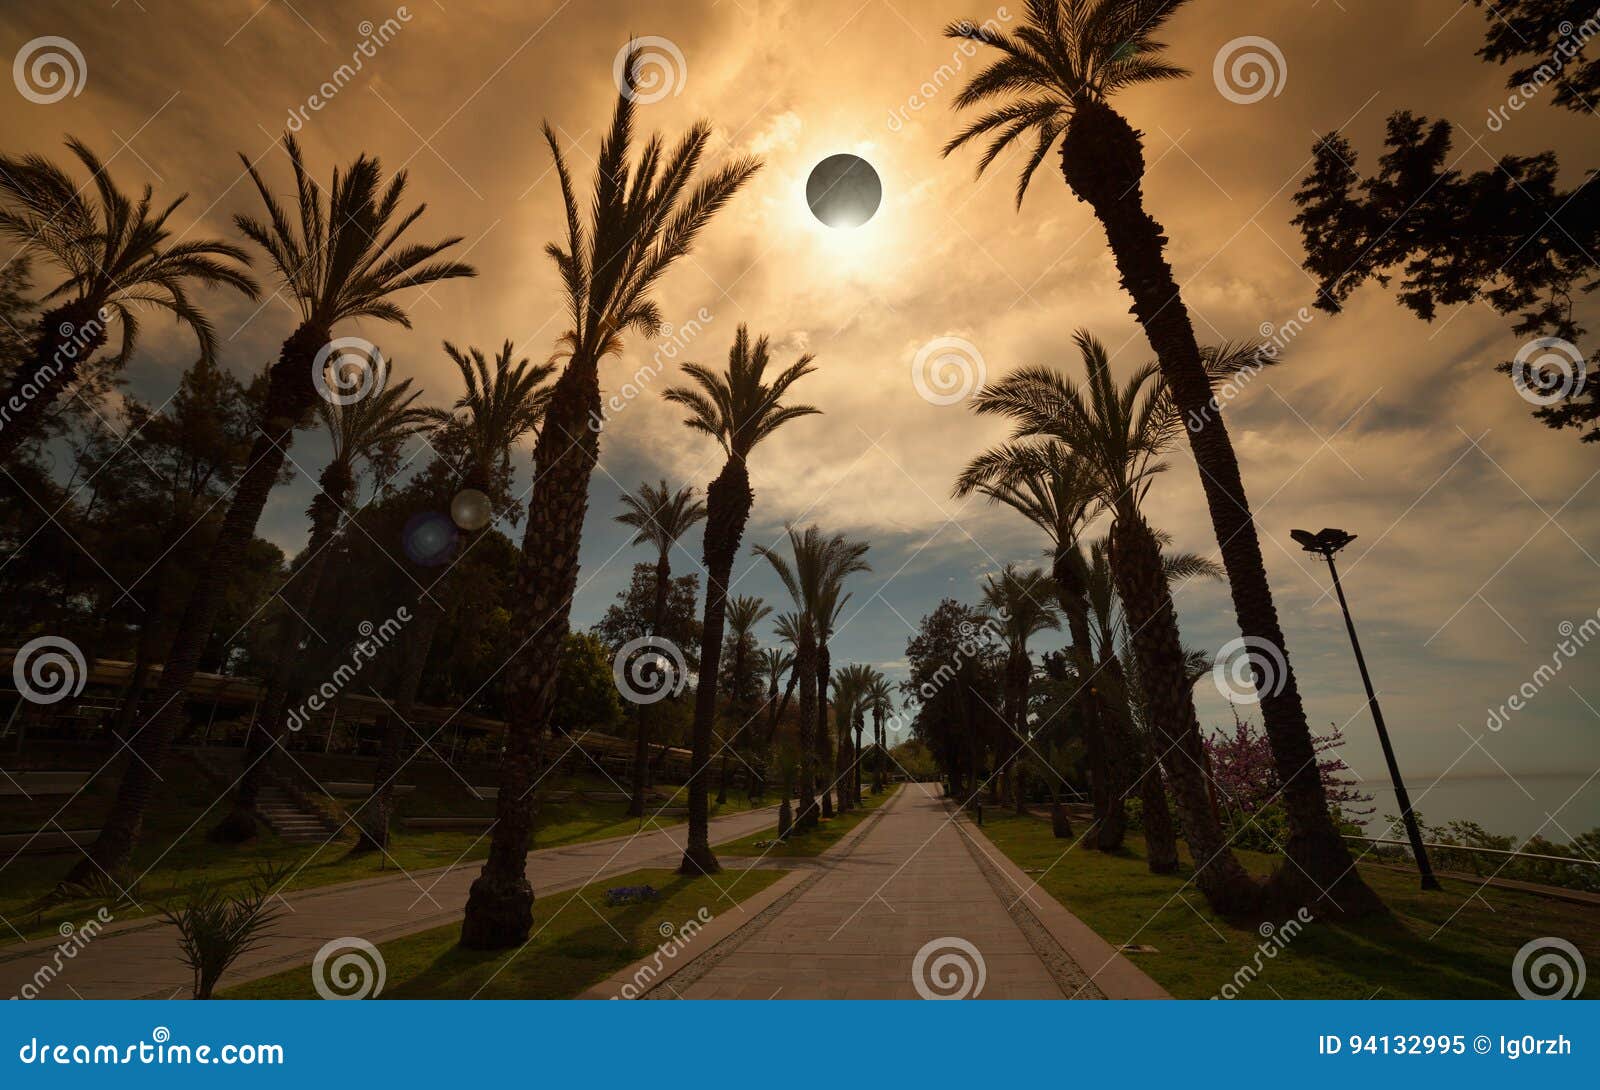 total solar eclipse, palm avenue in resort city